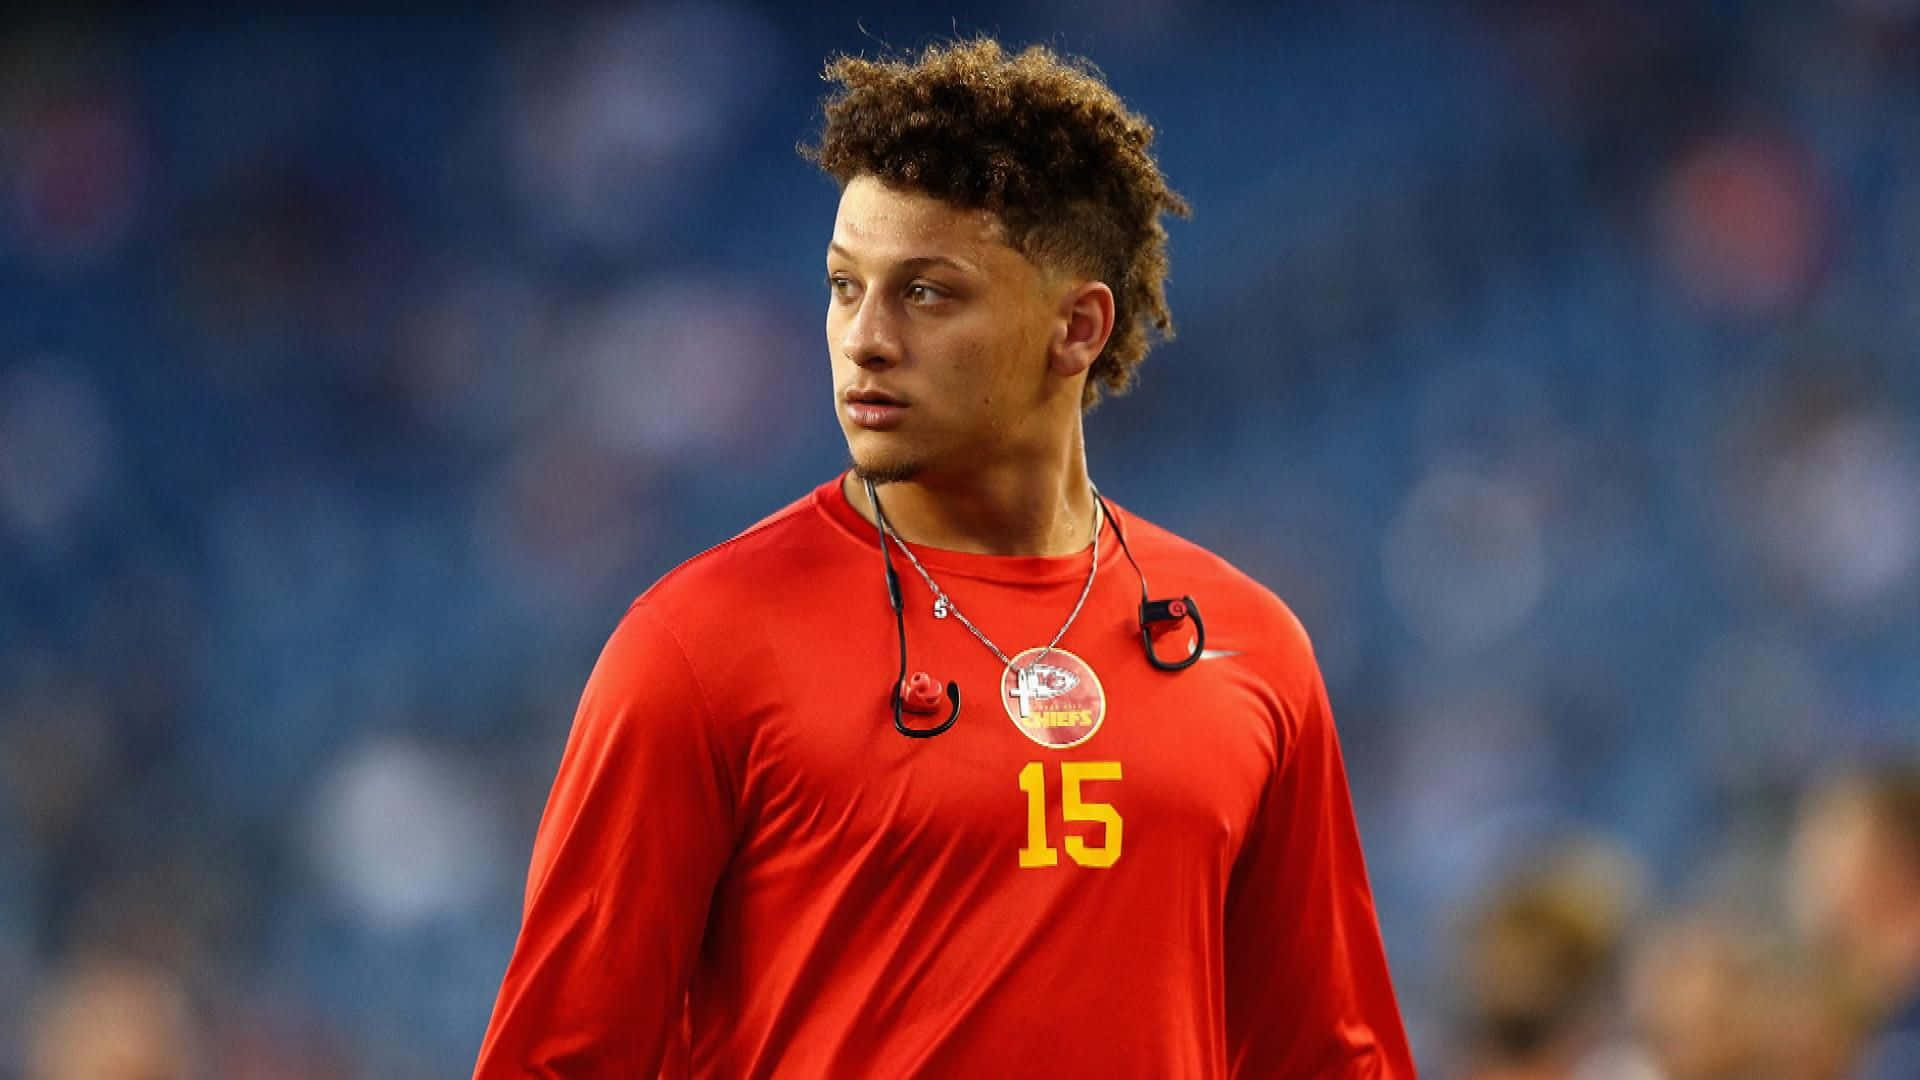 Patrick Mahomes in Kansas City Chiefs uniform, ready to execute an iconic pass